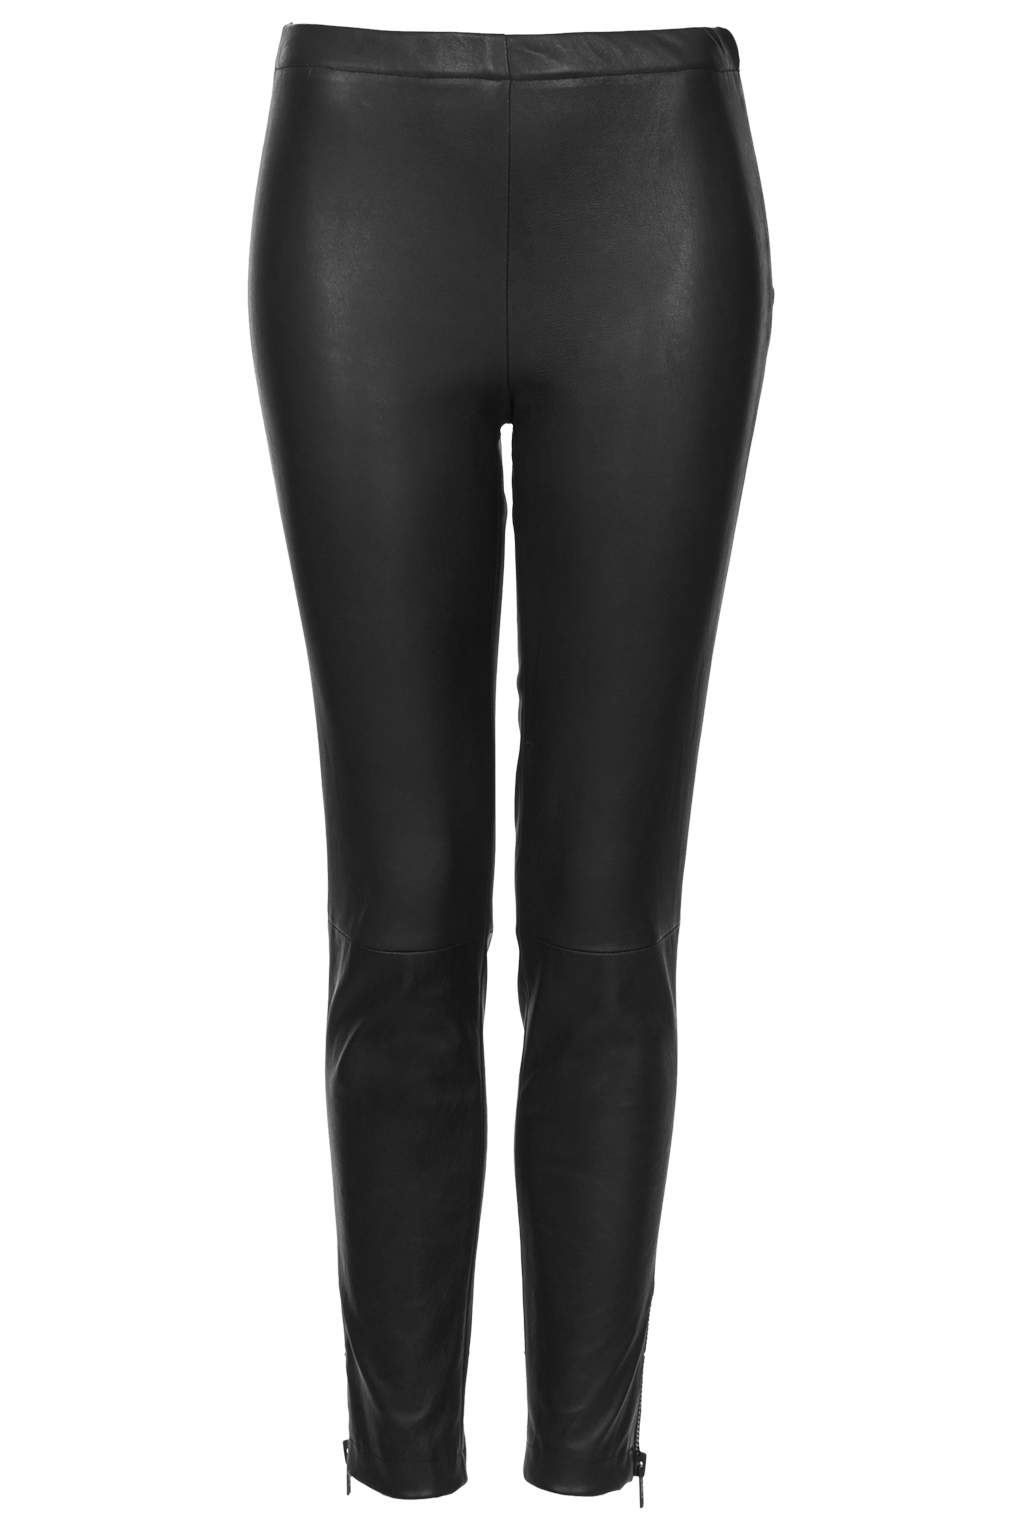 Topshop Leather Trousers in Black | Lyst